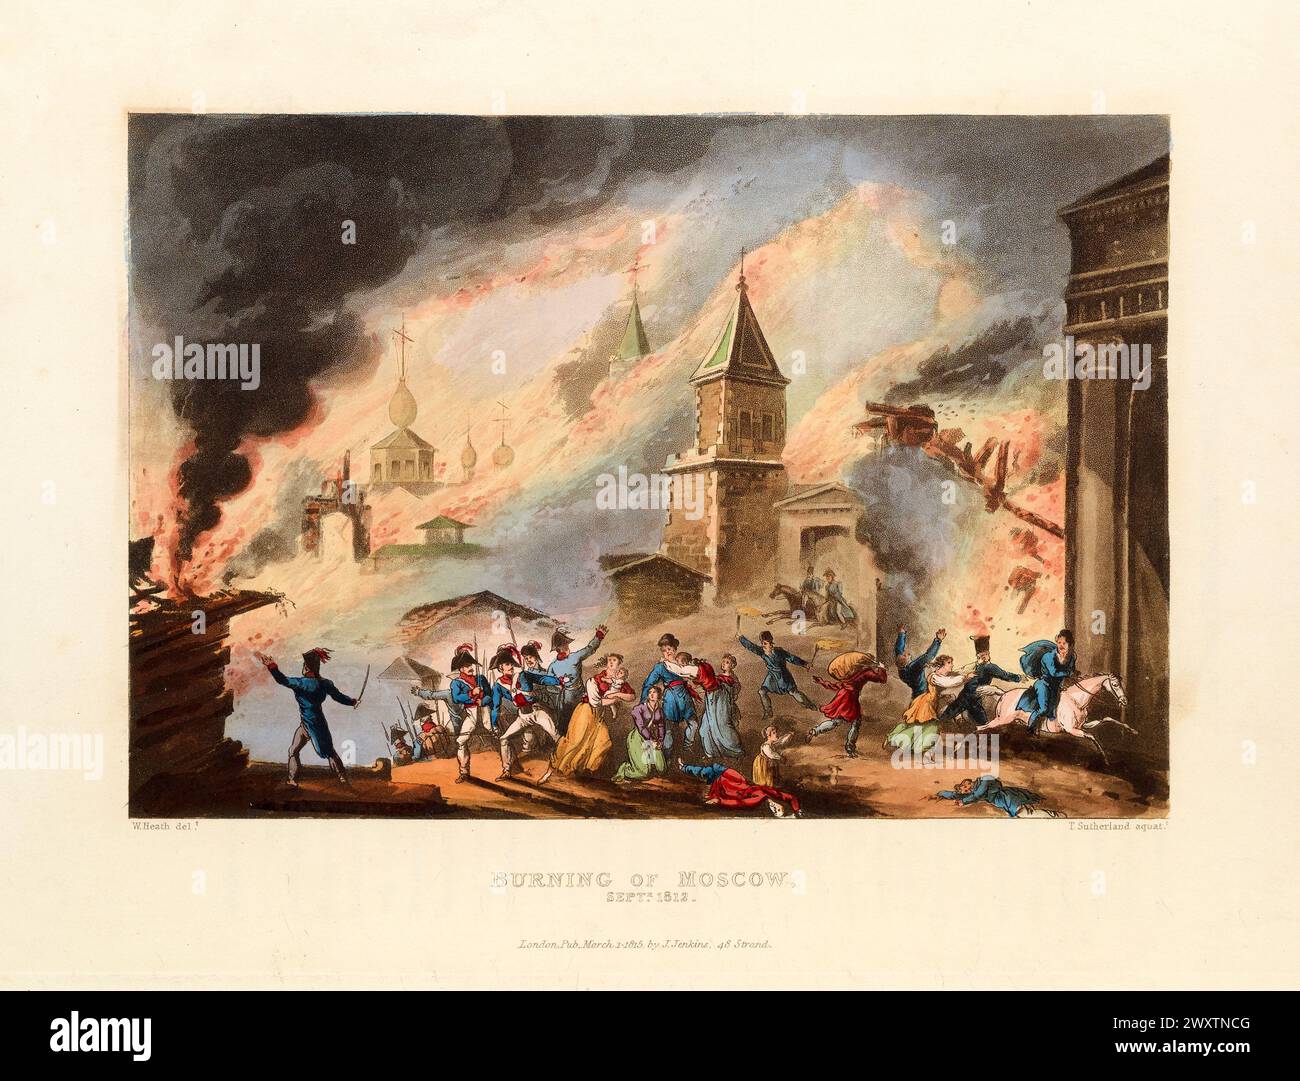 Burning of Moscow, September 1812.  Vintage Coloured Aquatint, published by James Jenkins, 1815,  from  The martial achievements of Great Britain and her allies : from 1799 to 1815. Stock Photo